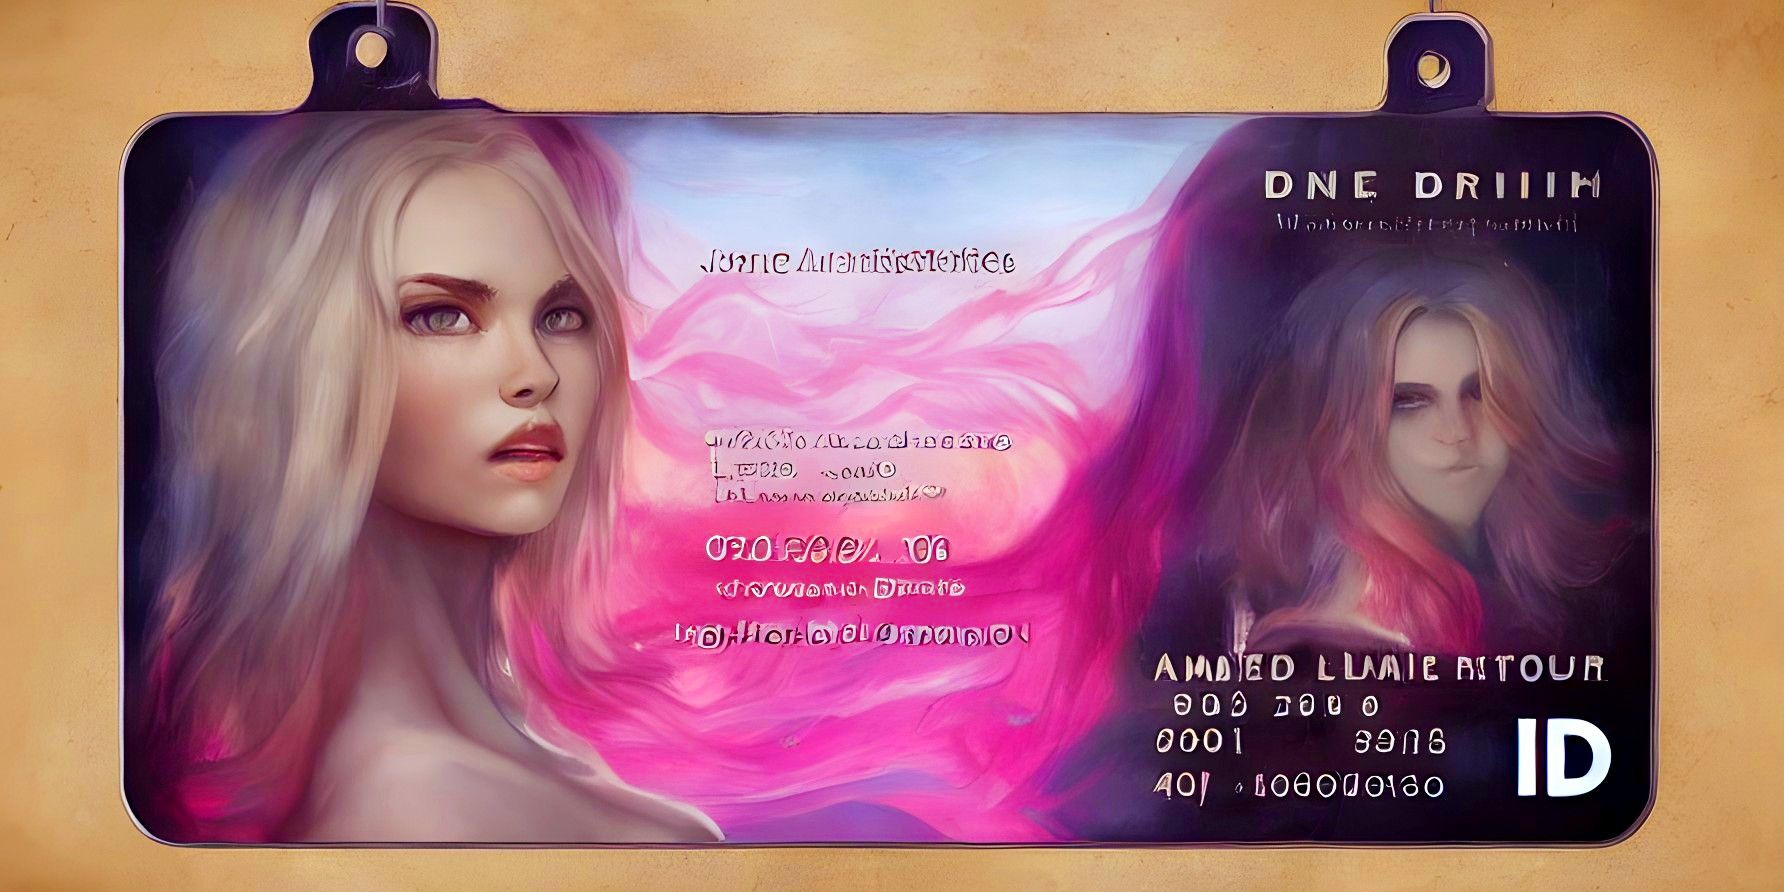 Colorful ID card with young woman's portrait, jumbled text representing information